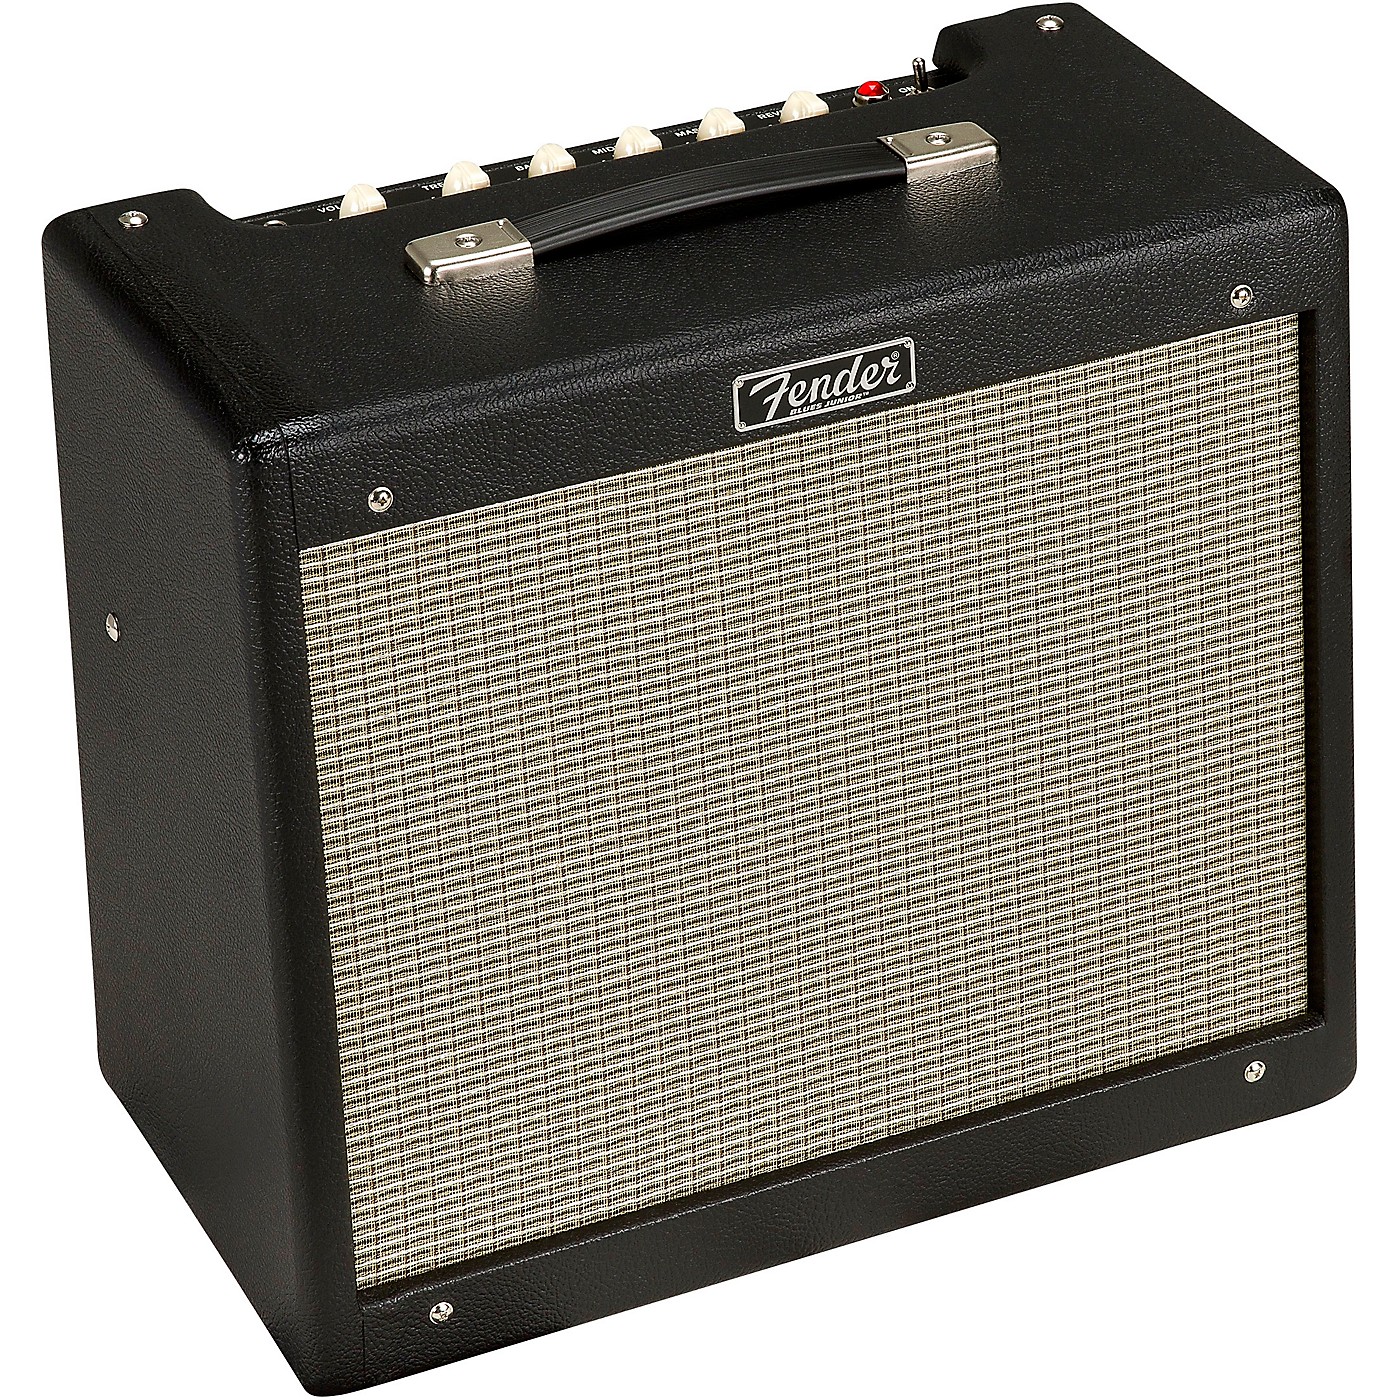 Fender Blues Jr. IV Special Edition 15W 1x12 Private Jack Guitar Combo Amp thumbnail